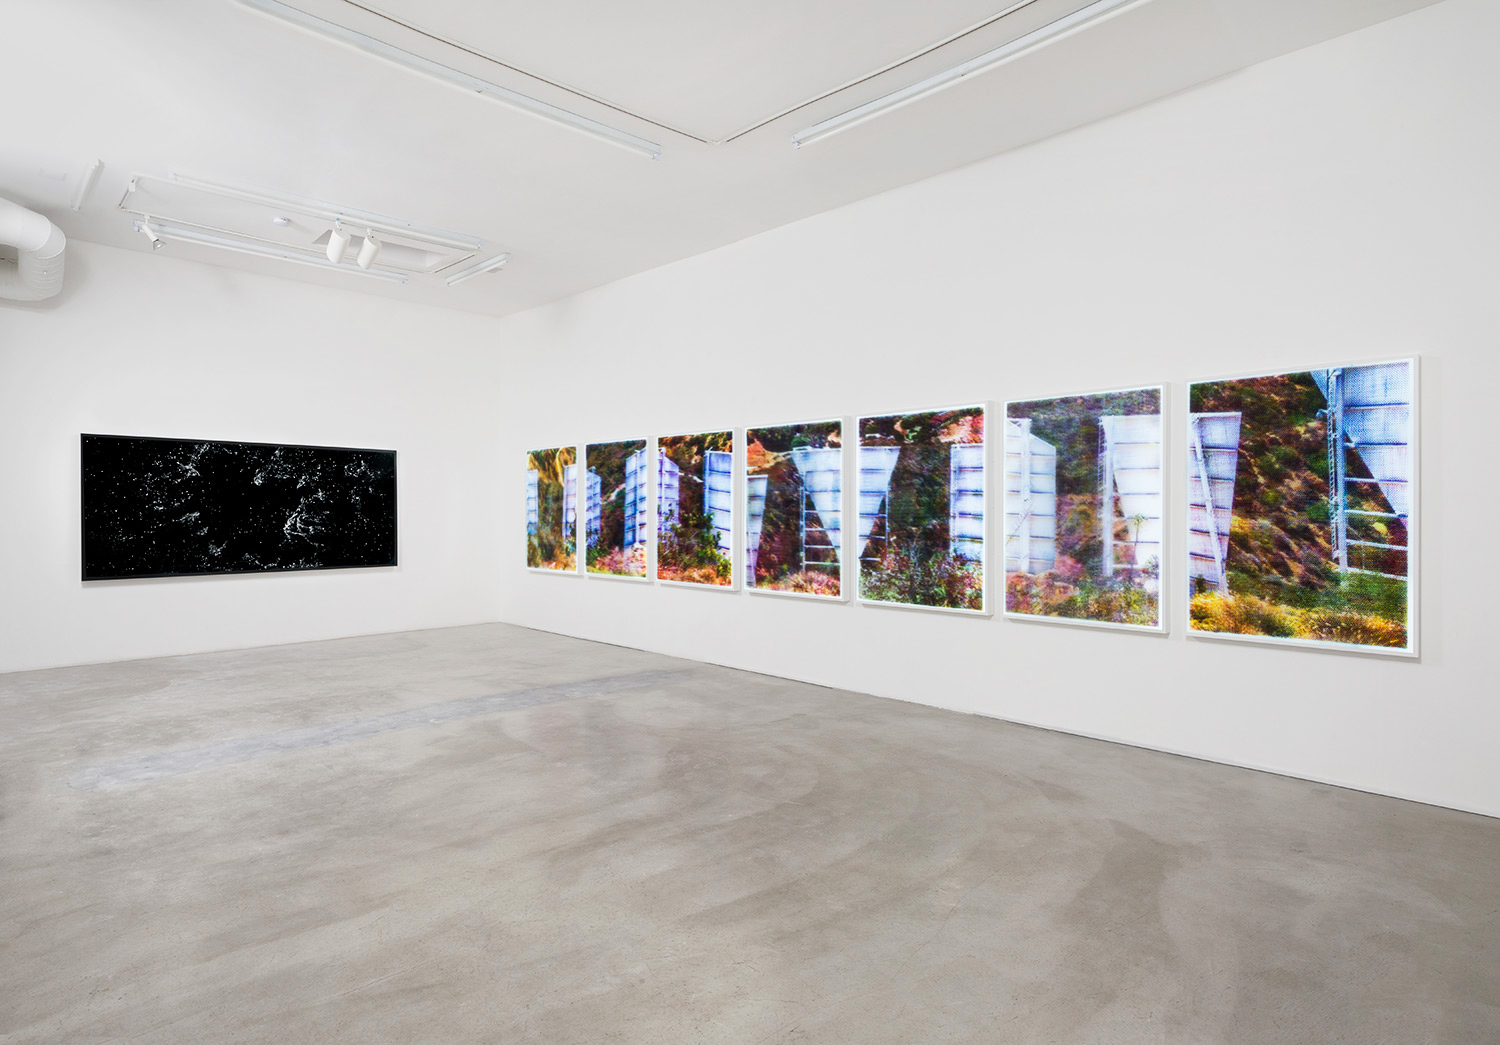 Installation View of "Matthew Brandt: Velvet and Bubble Wrap" at M+B, Los Angeles